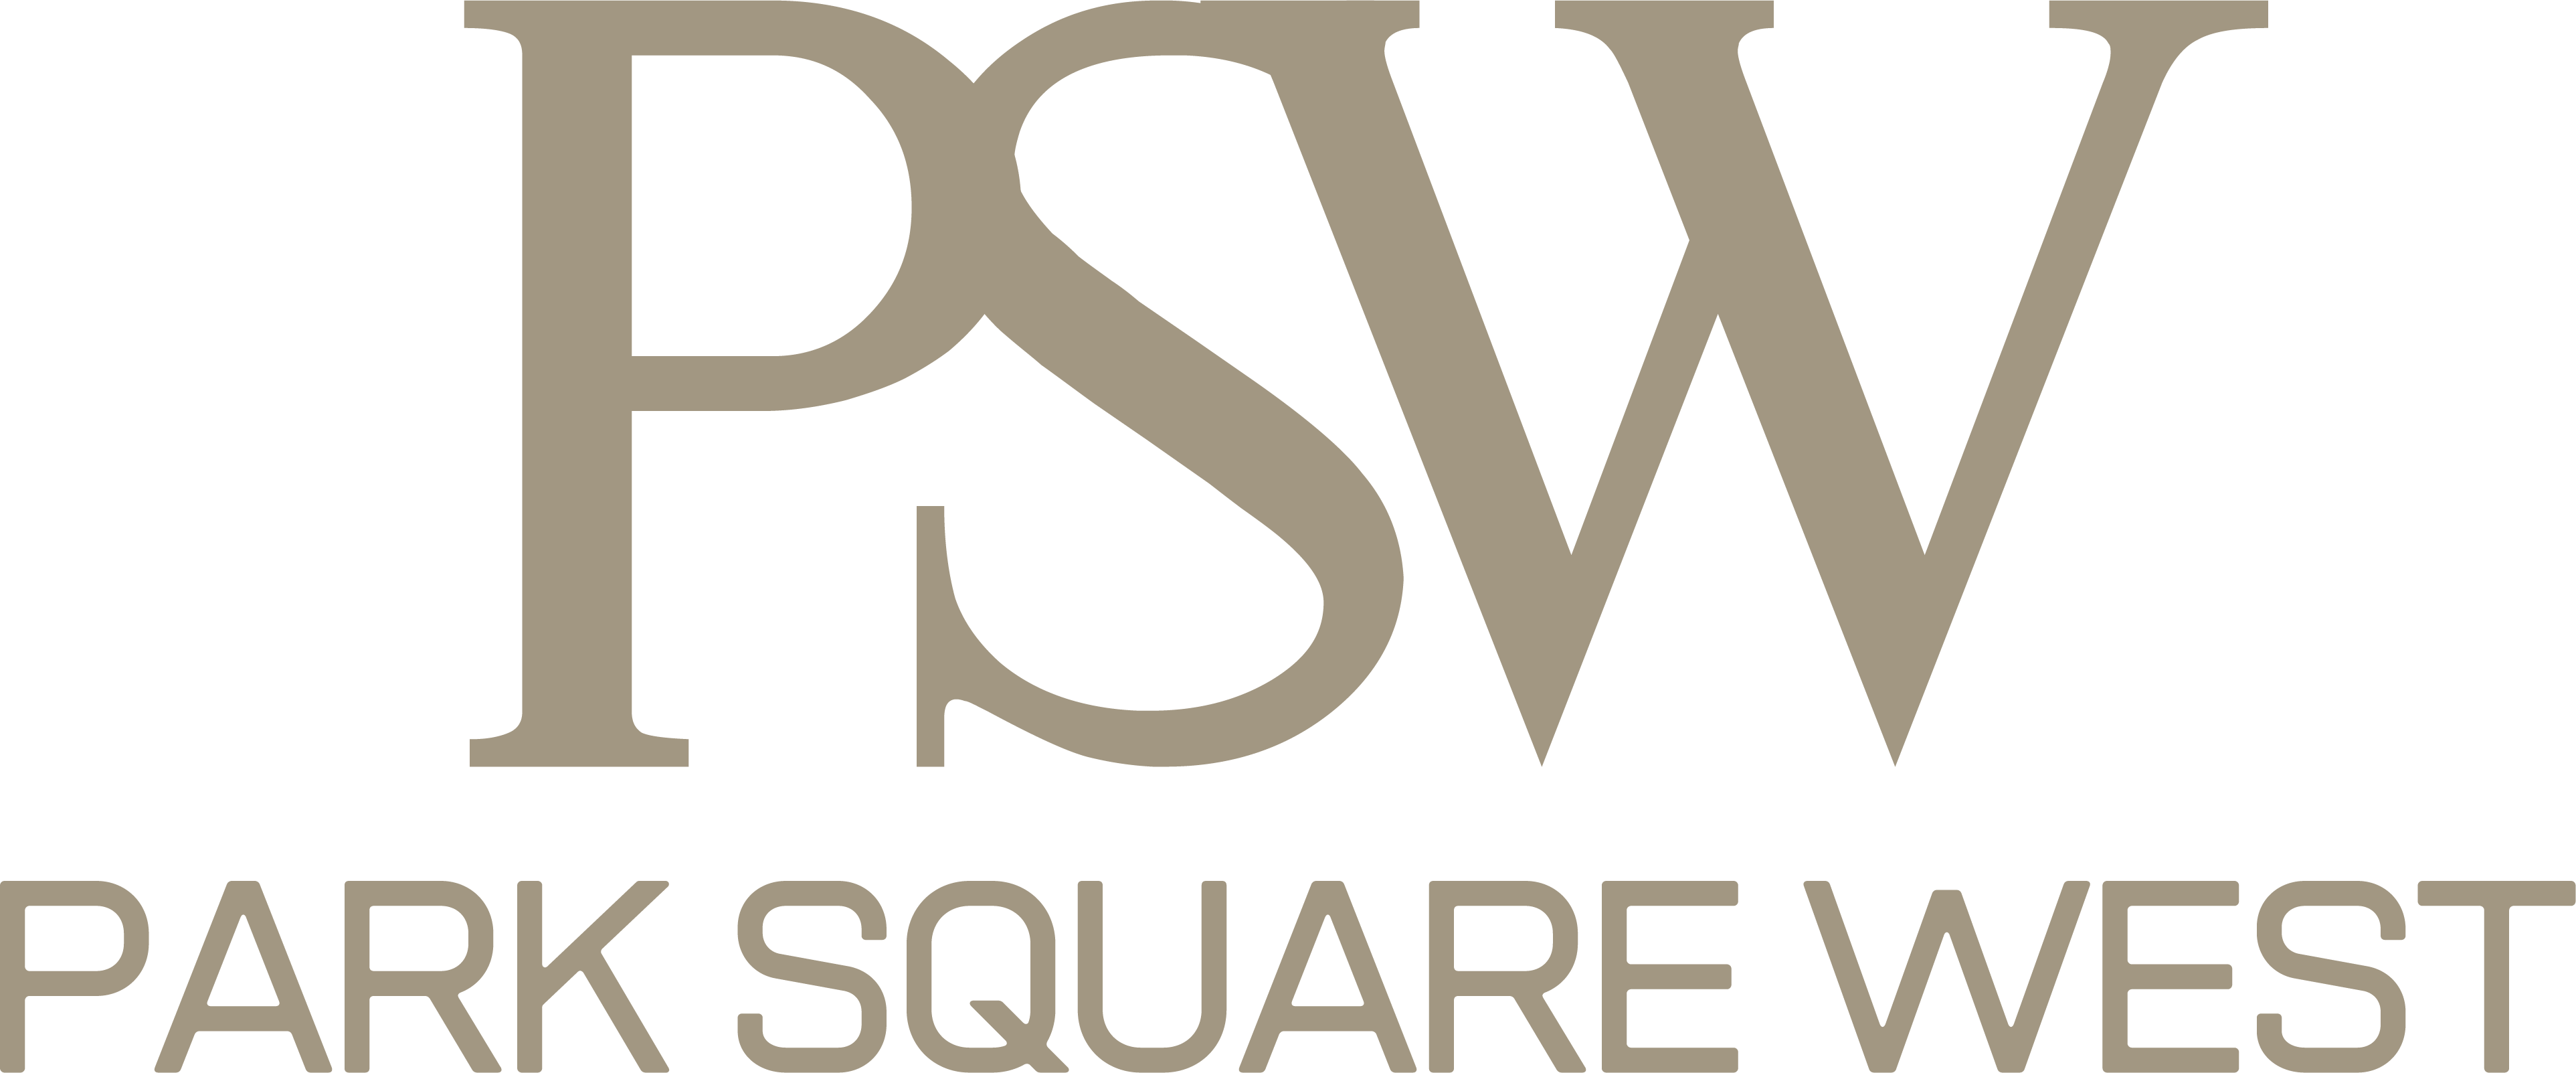 Park Square West | Apartments for Rent Stamford, CT logo